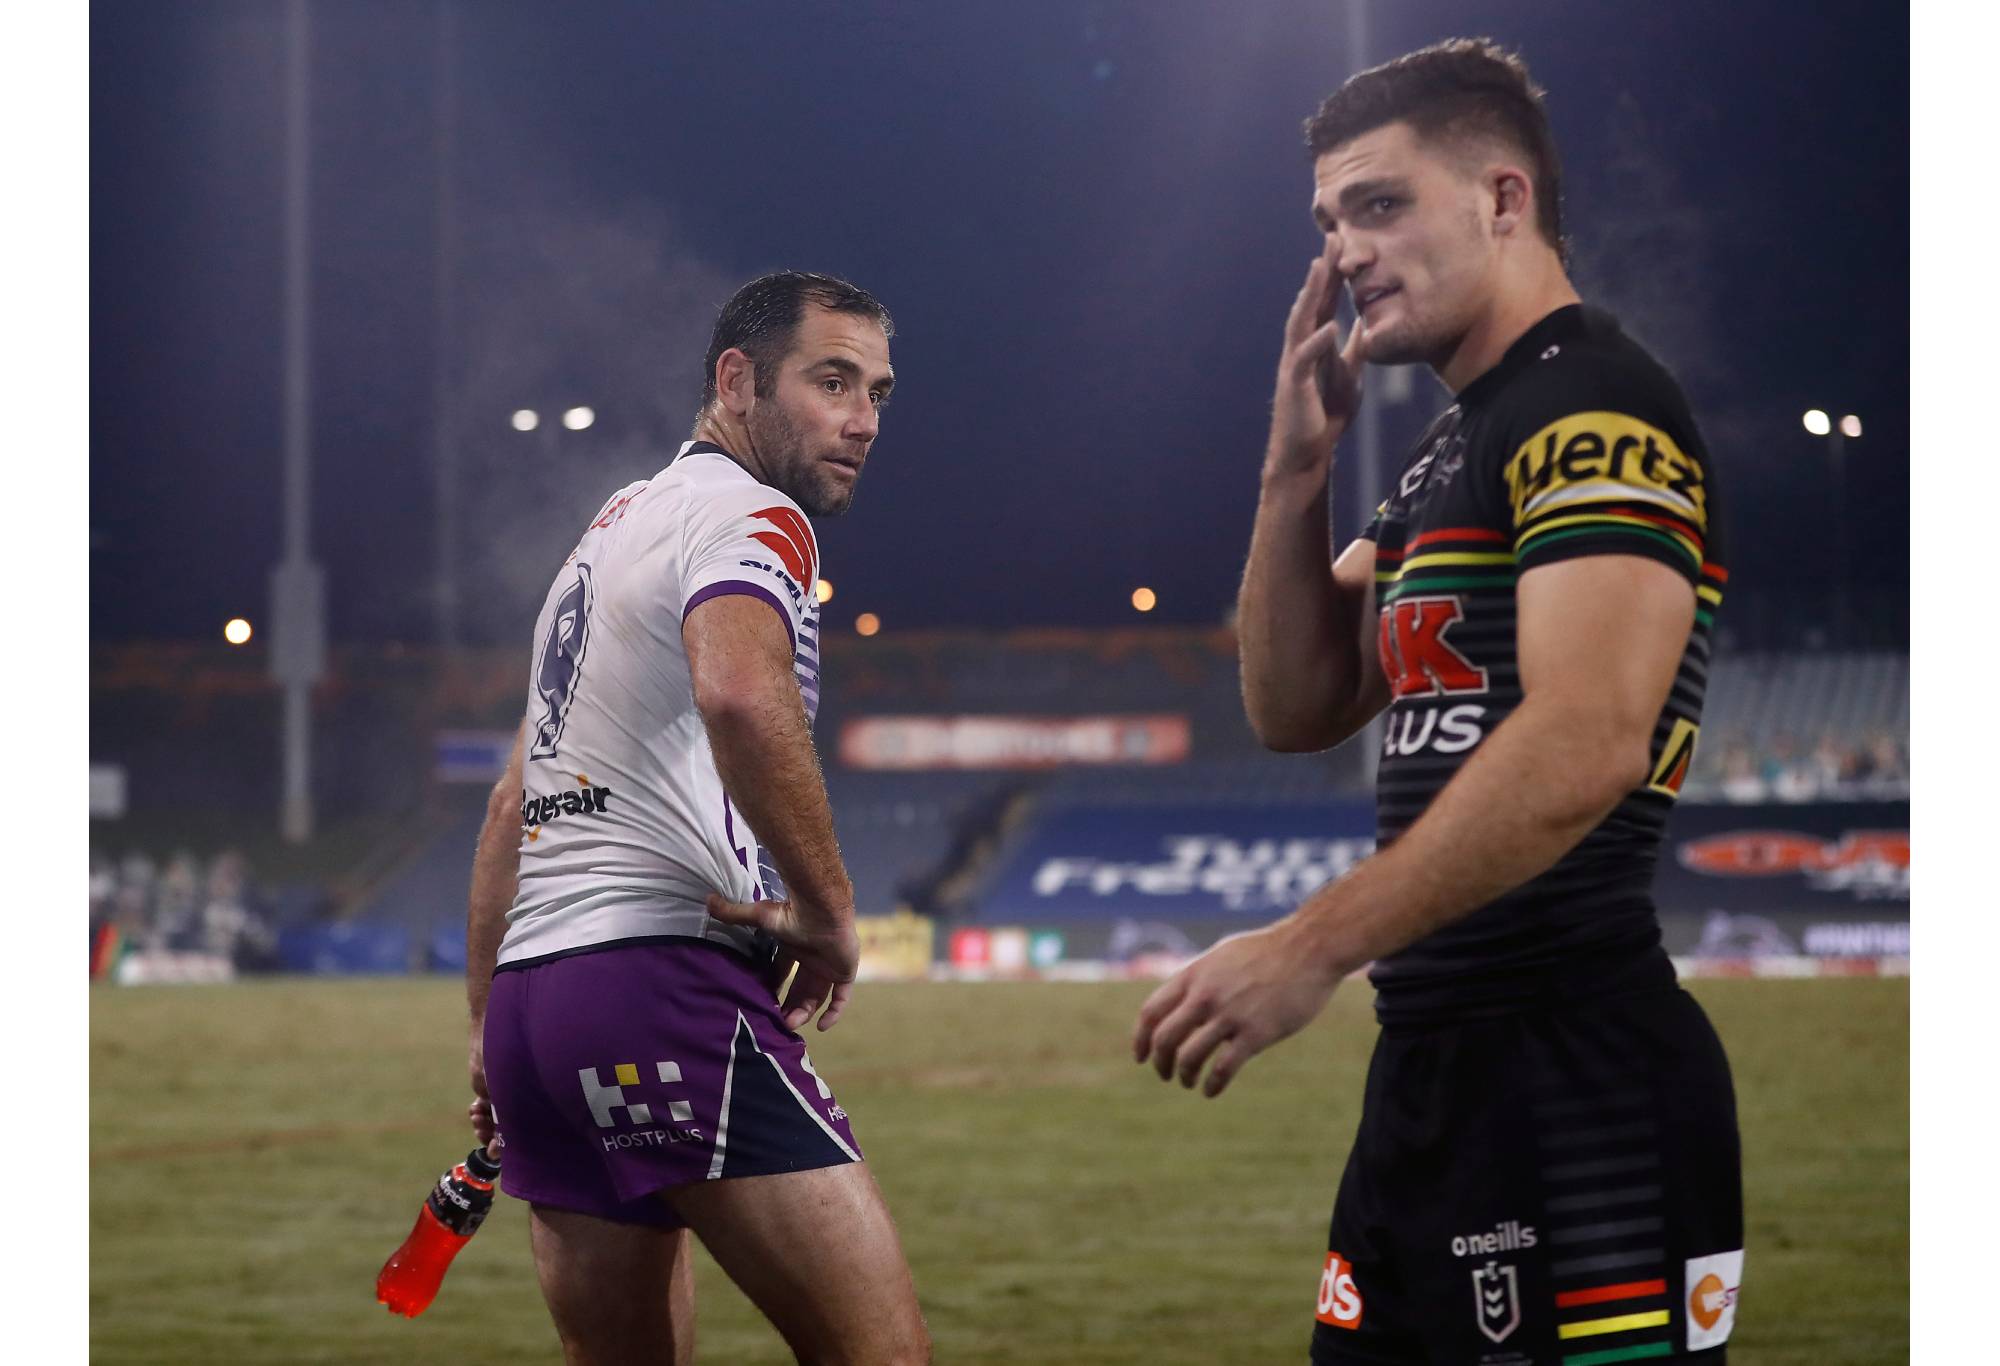 SYDNEY, AUSTRALIA - JUNE 19: Cameron Smith of the Storm passes Nathan Cleary of the Panthers after the round six NRL match between the Penrith Panthers and the Melbourne Storm at Campbelltown Stadium on June 19, 2020 in Sydney, Australia. (Photo by Ryan Pierse/Getty Images)